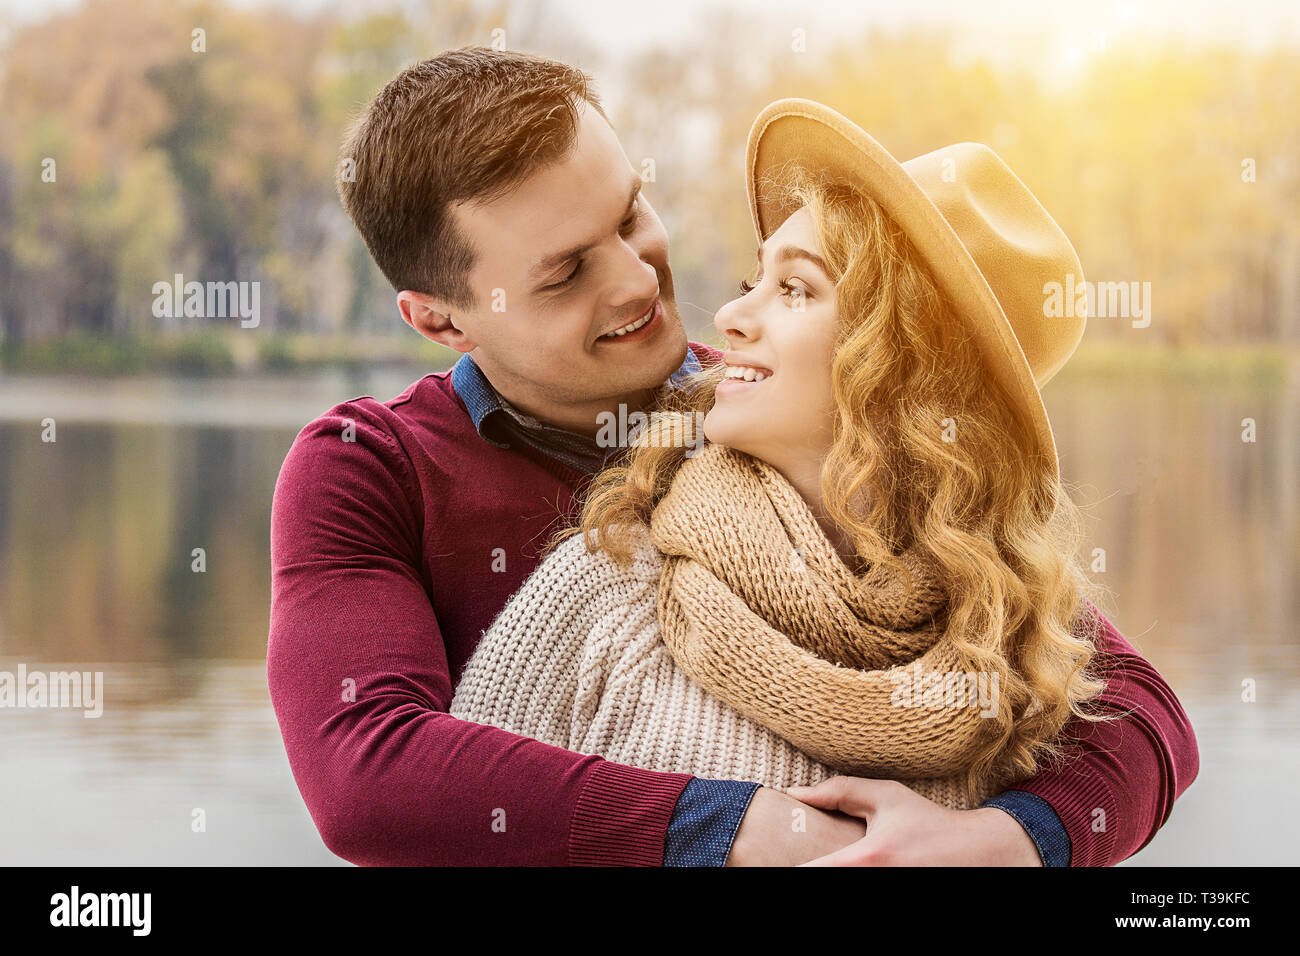 Romantic couple. Cropped image of beautiful hugging couple looking at each other and smiling while standing outdoors. Handsome man embracing his attra Stock Photo